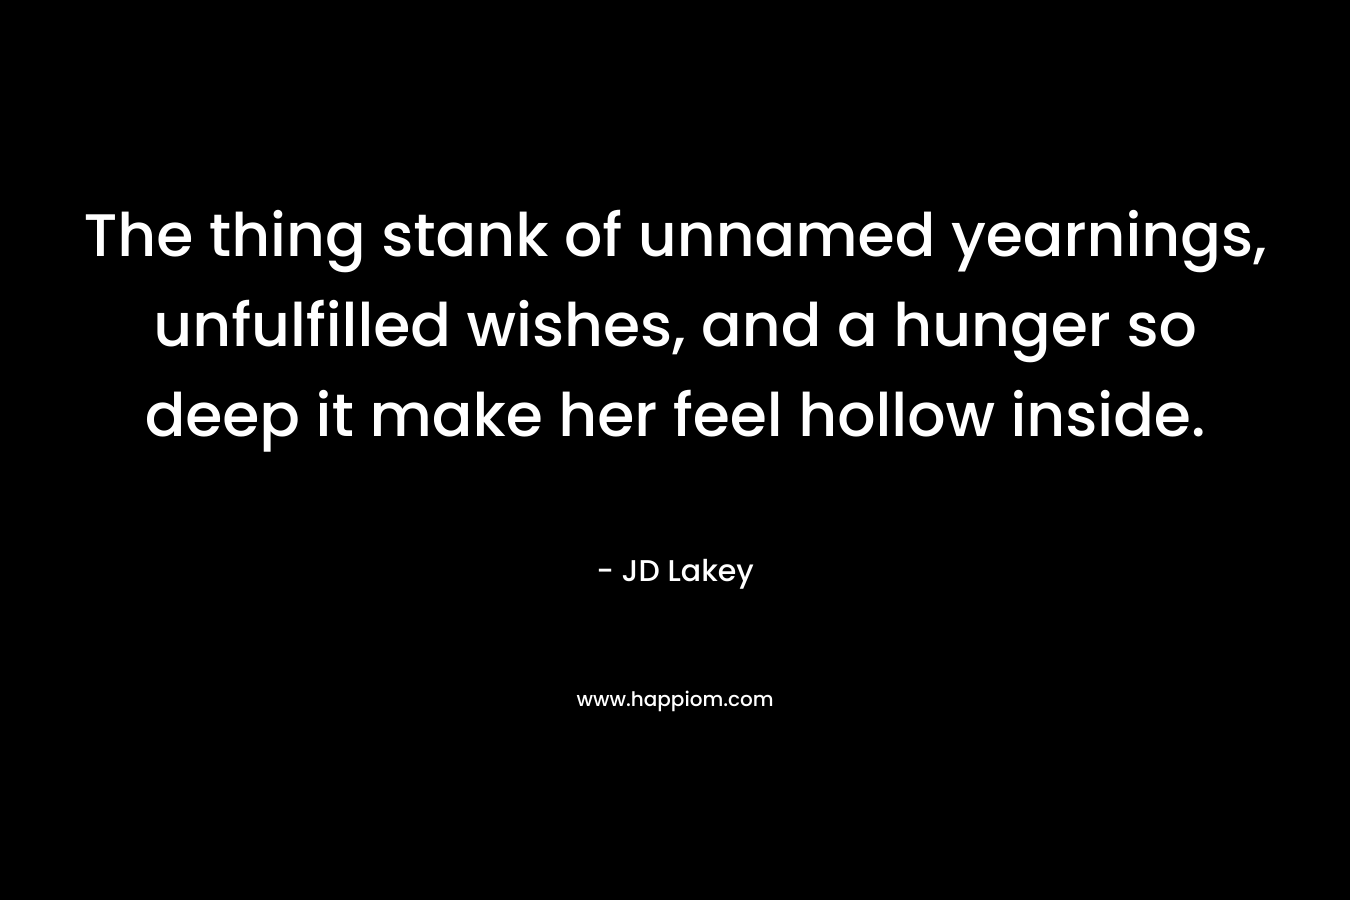 The thing stank of unnamed yearnings, unfulfilled wishes, and a hunger so deep it make her feel hollow inside. – JD Lakey